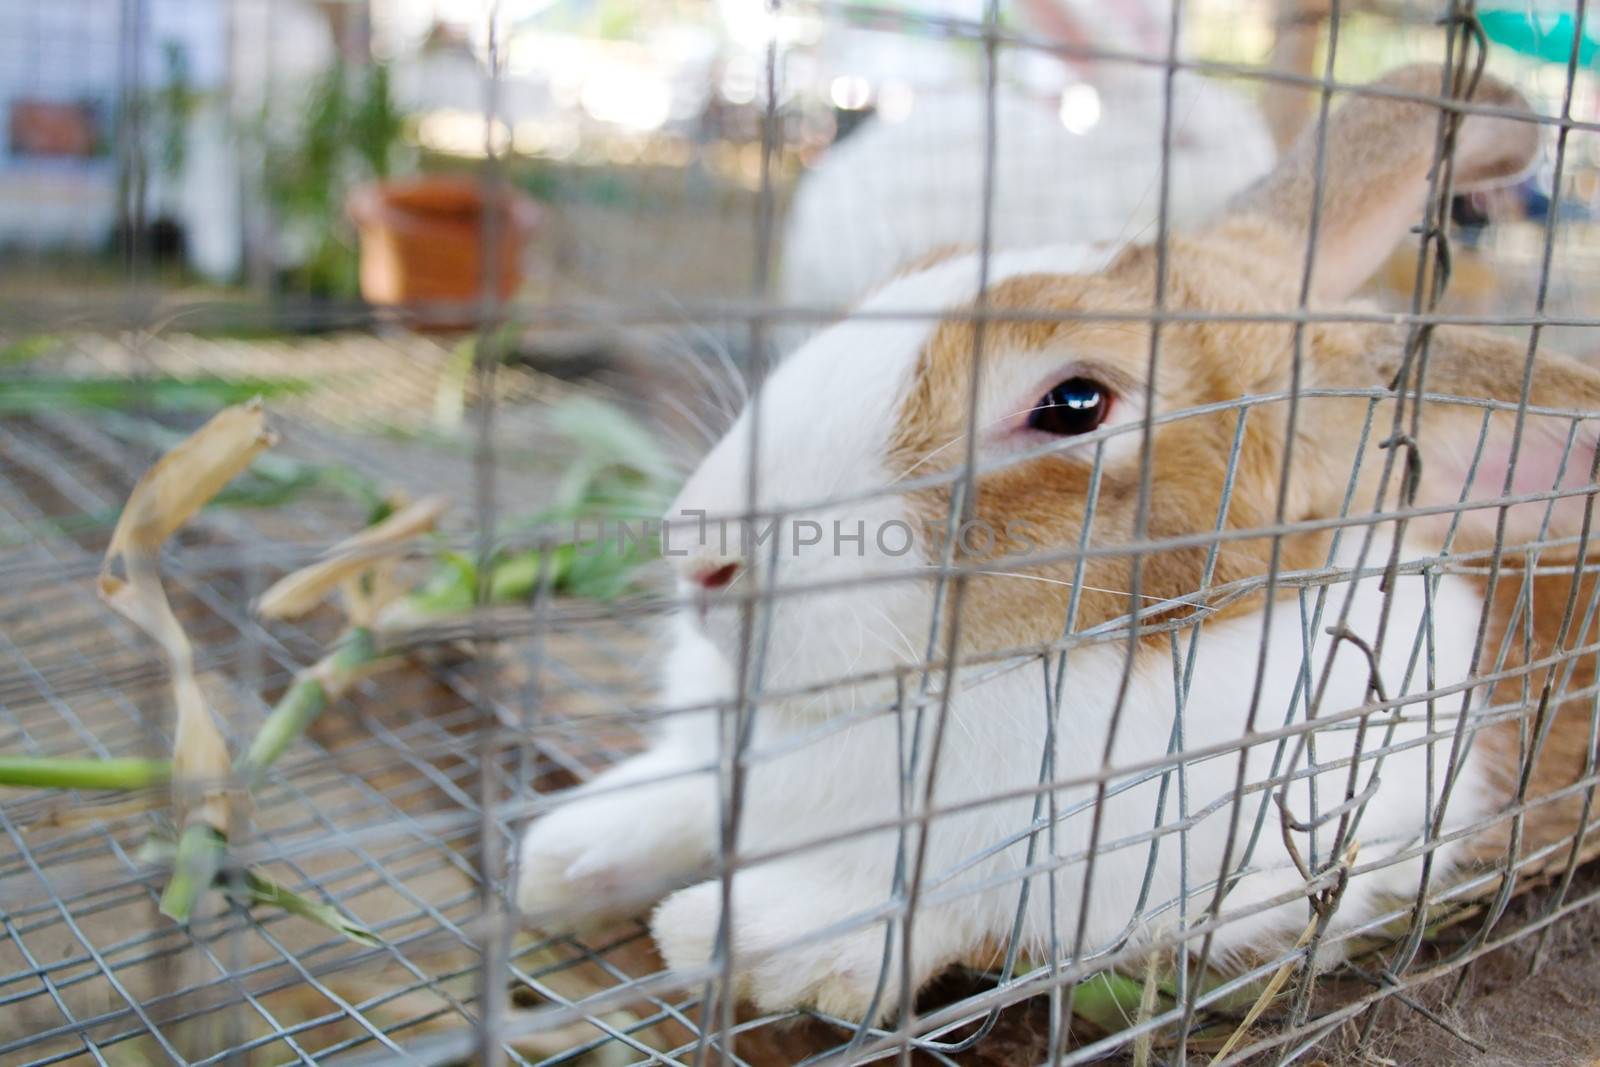 White rabbit was placed in a cage.